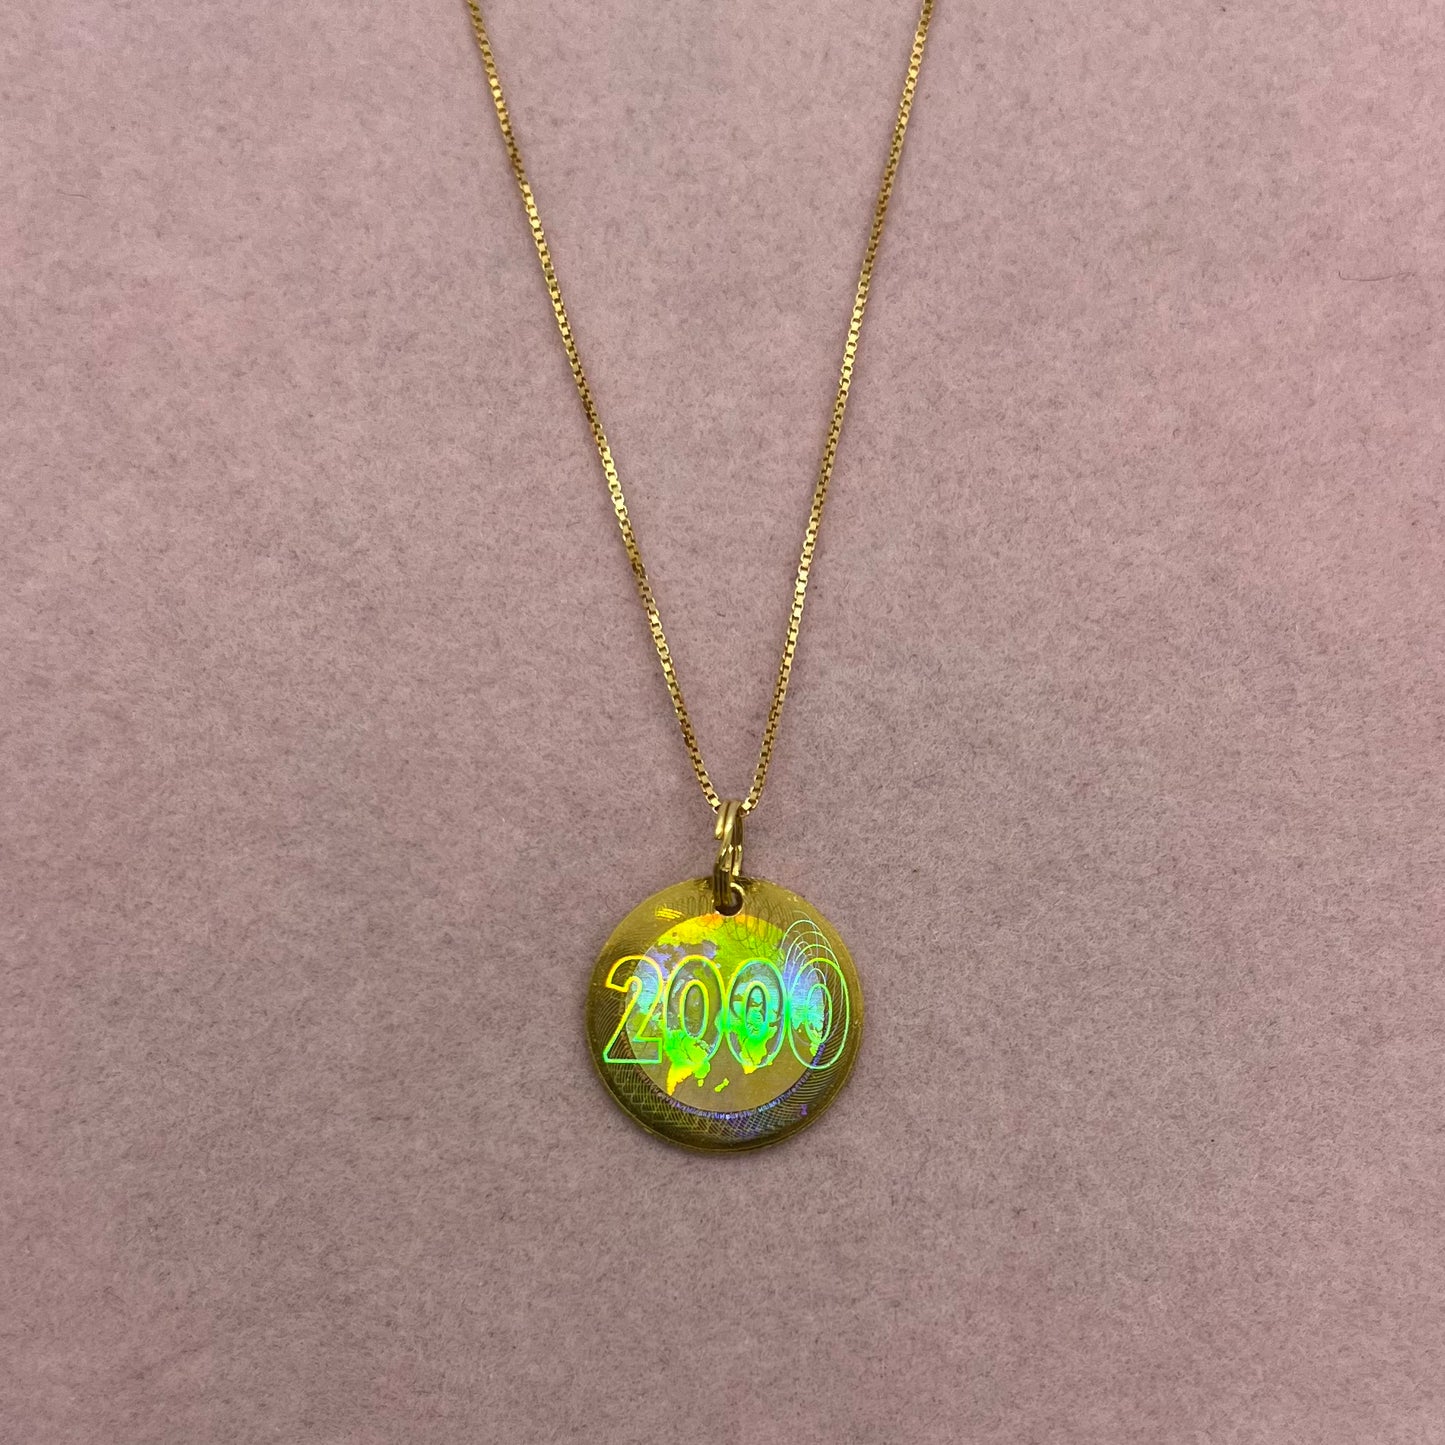 Holographic 24k 1999-2000 Pendant by Michael Anthony